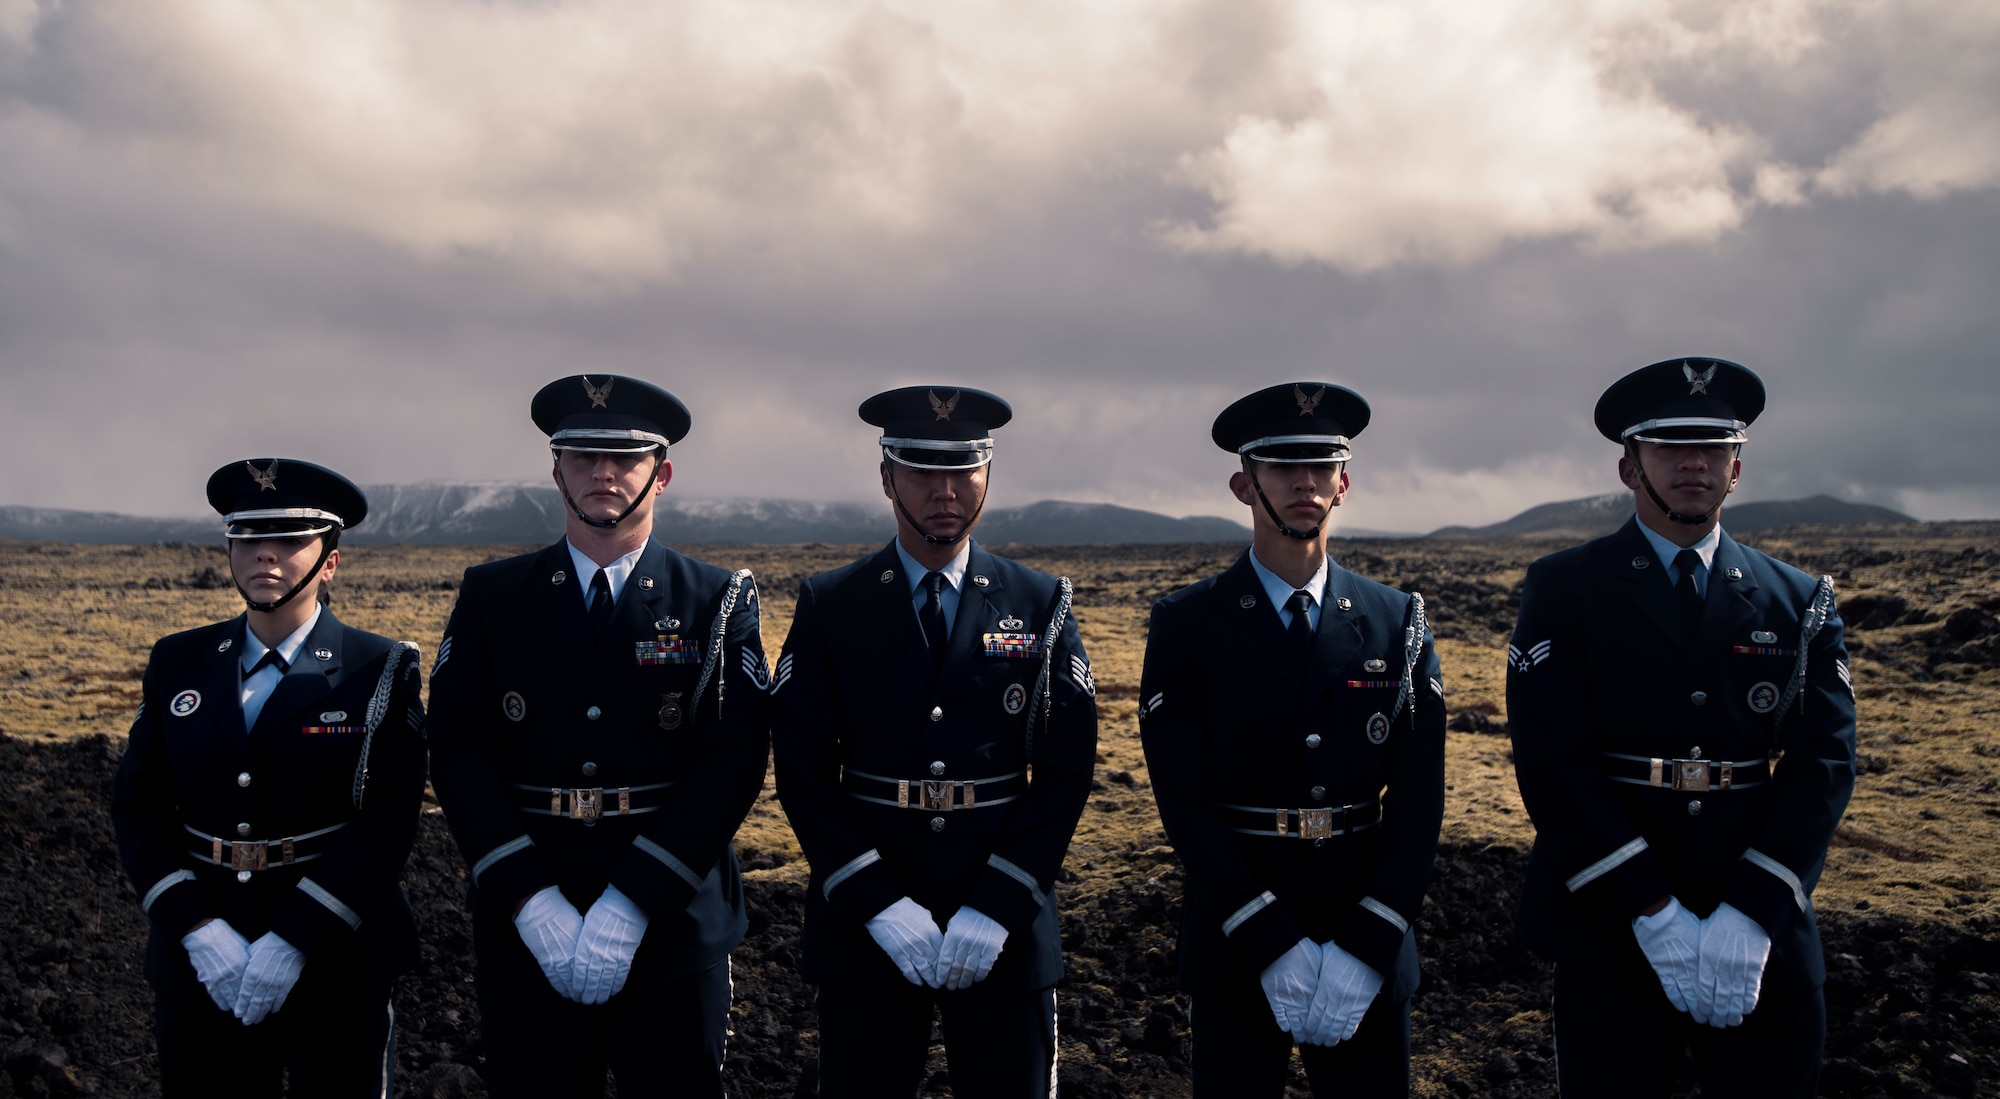 Members of Spangdahlem Air Base, Germany, Ceremonial Guard pose for a photo during a monument dedication ceremony to honor the crew of B-24 Liberator “Hot Stuff” at Keflavic Air Station, Iceland, May 3, 2018.  As two of the founding nations of NATO, Iceland and the U.S. continue their long and enduring relationship of seamless cooperation as allies.  (U.S. Navy photo by MC3 Evan Parker)